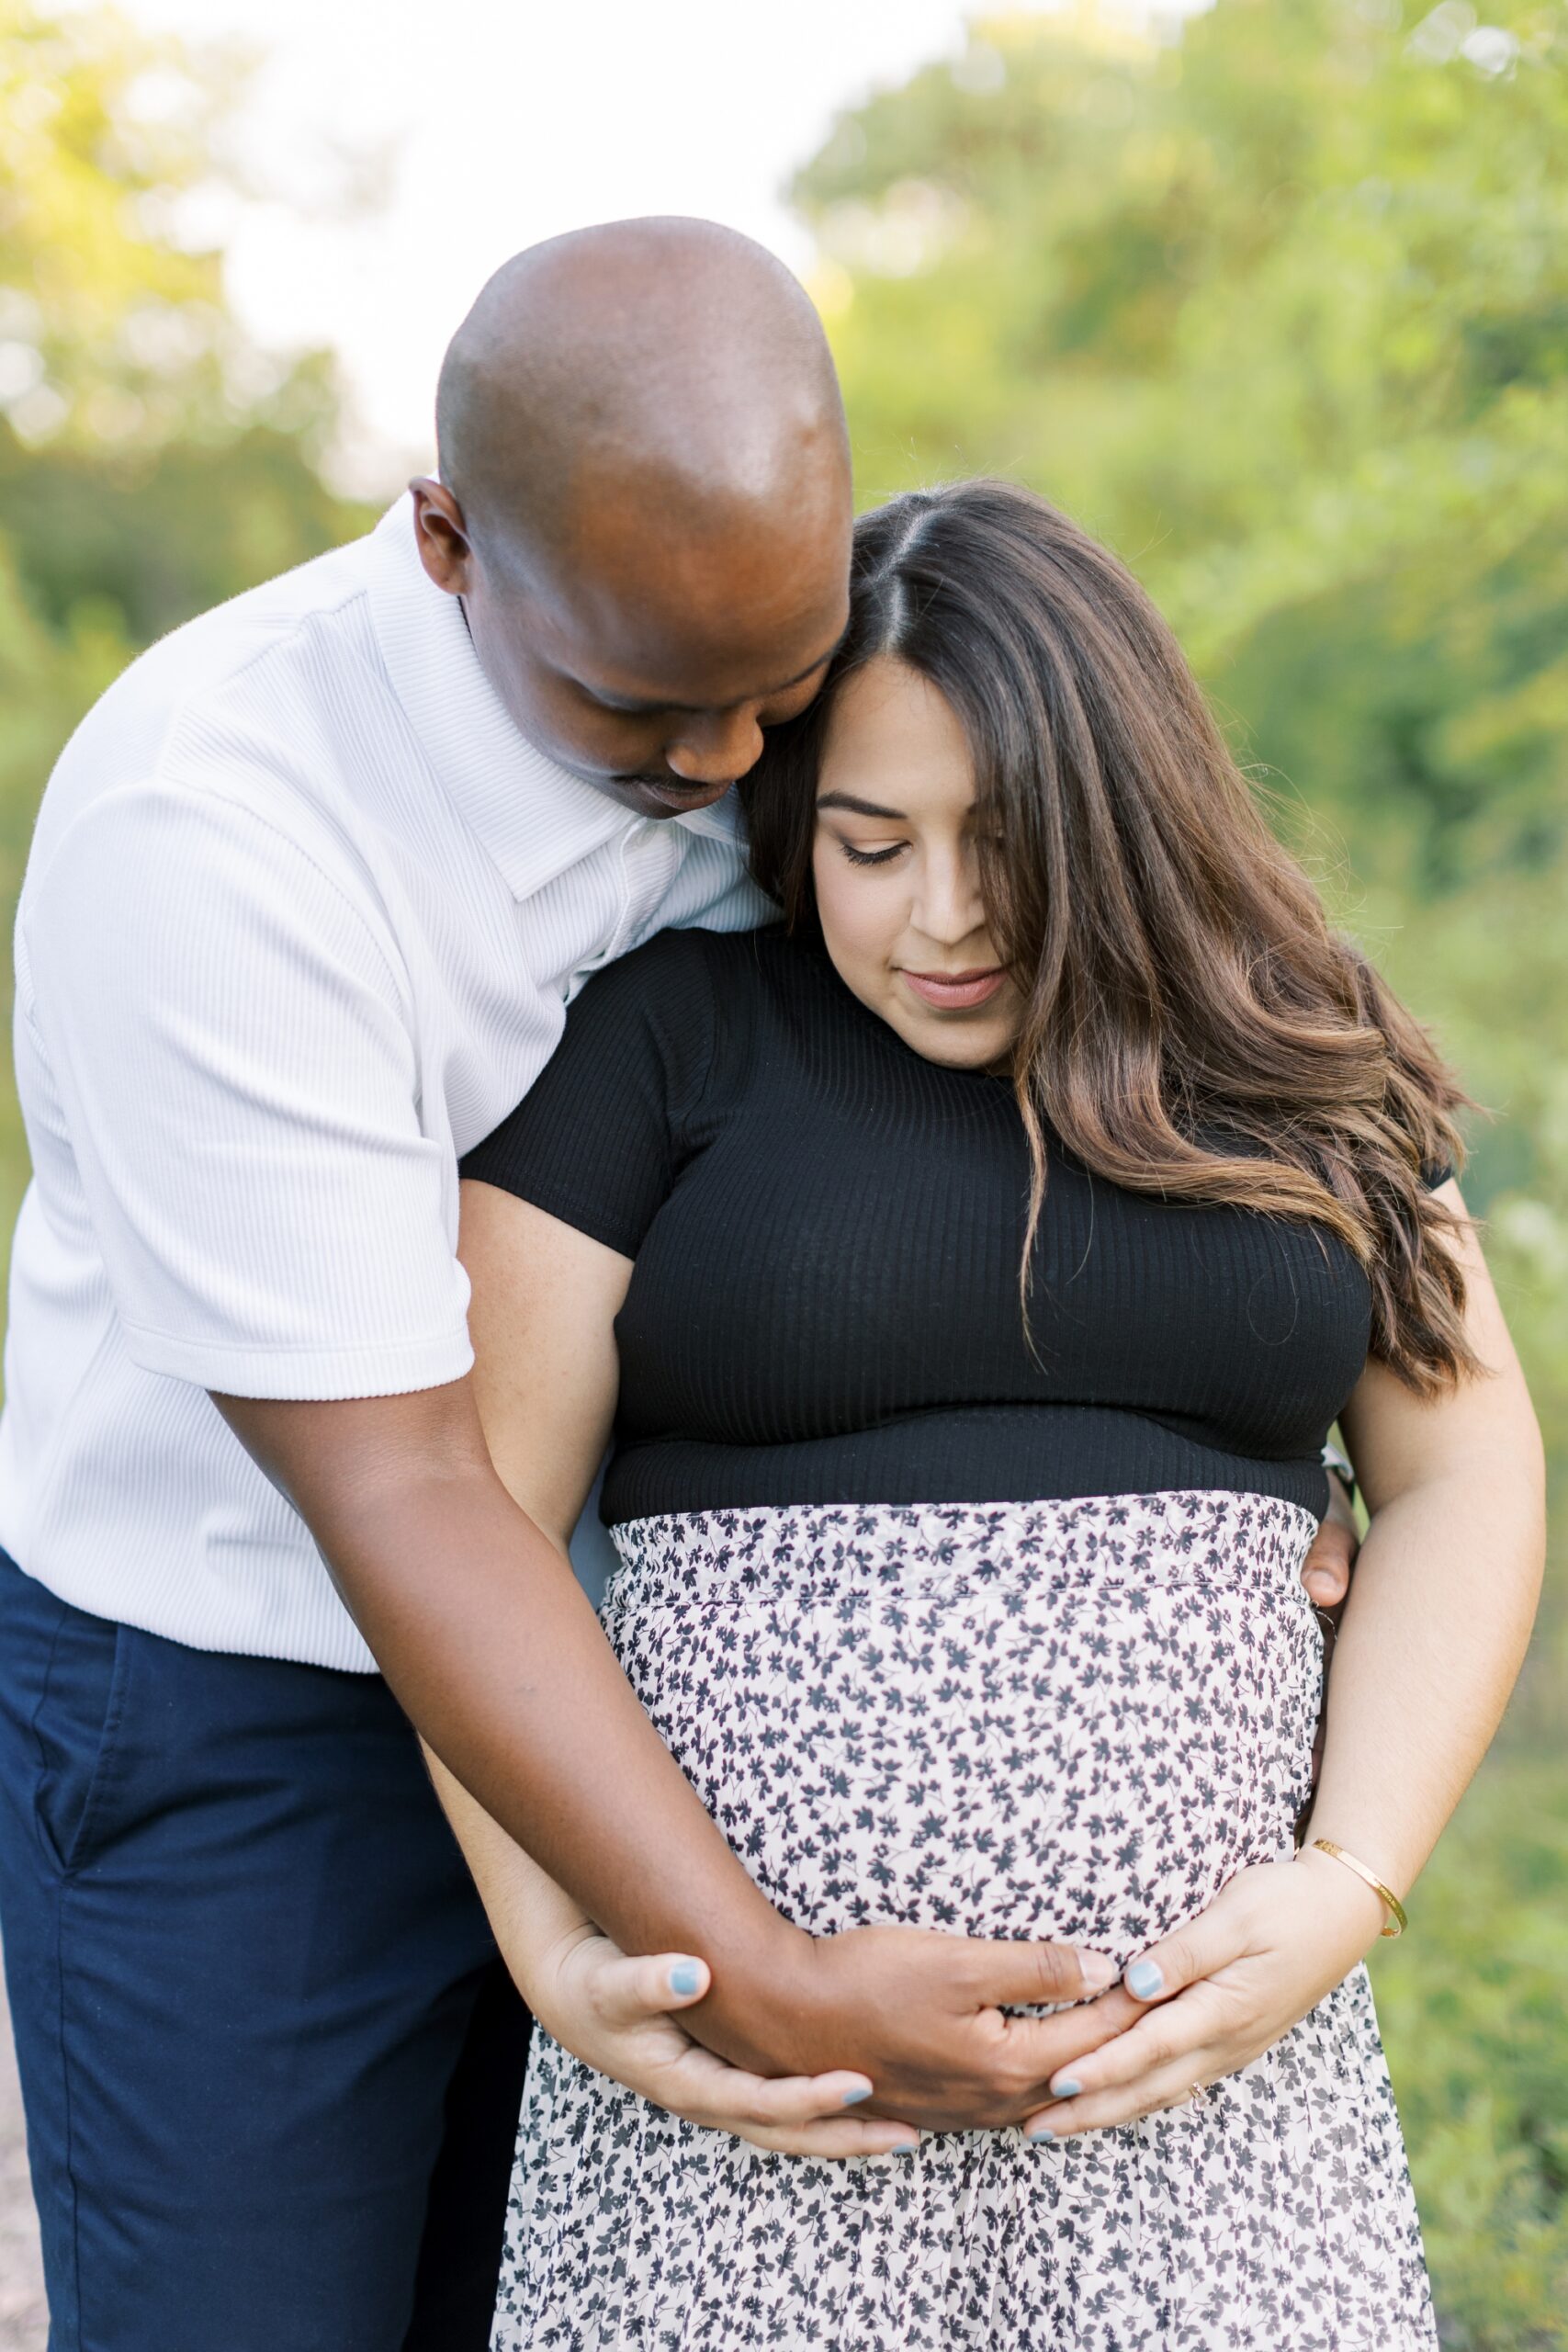 Man and woman pose during Chicago maternity photoshoot